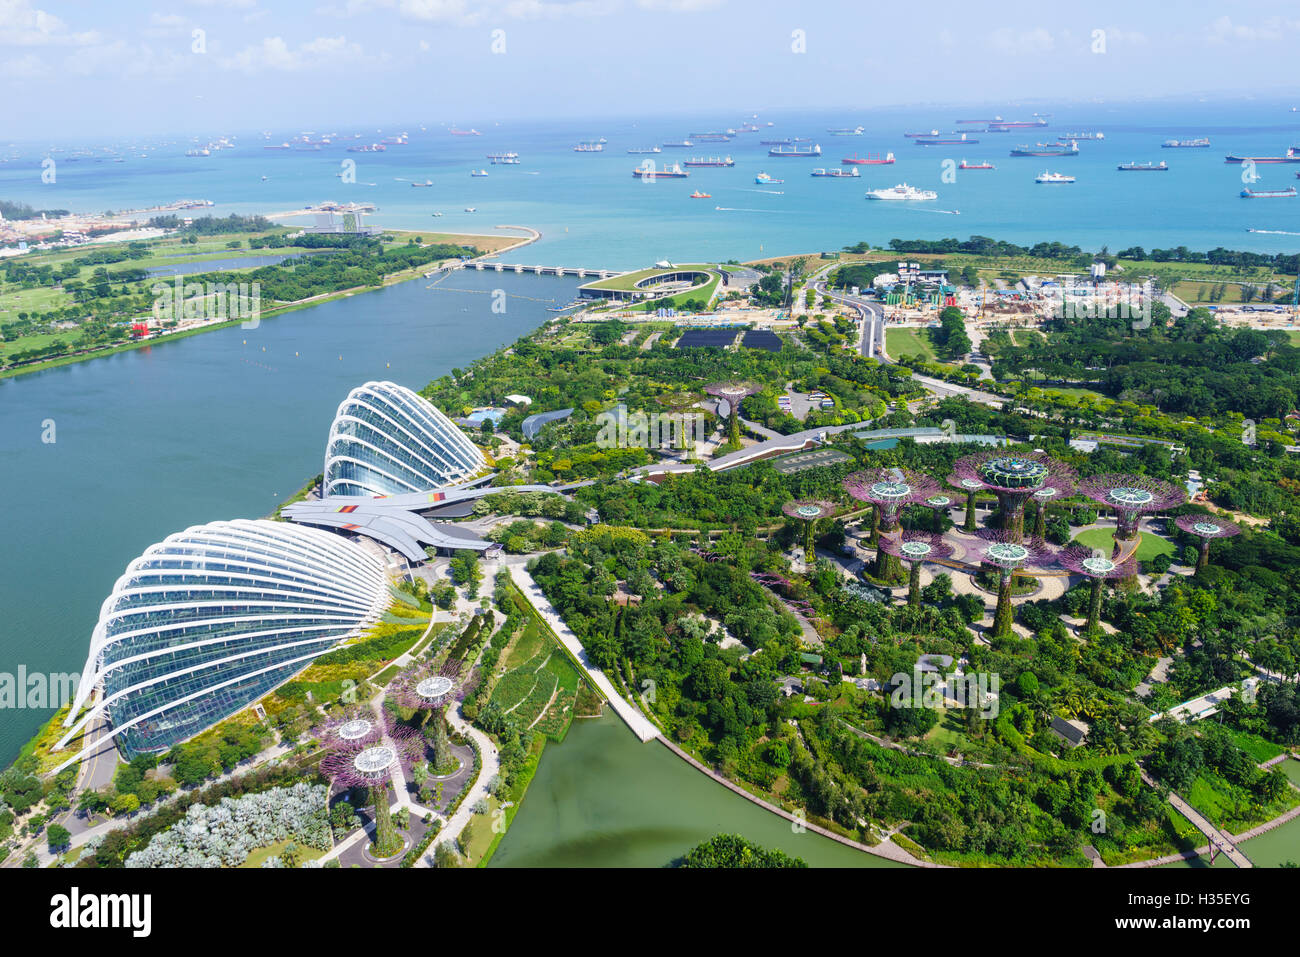 High view overlooking the Gardens by the Bay botanical gardens with its conservatories and Supertree Grove, Singapore Stock Photo